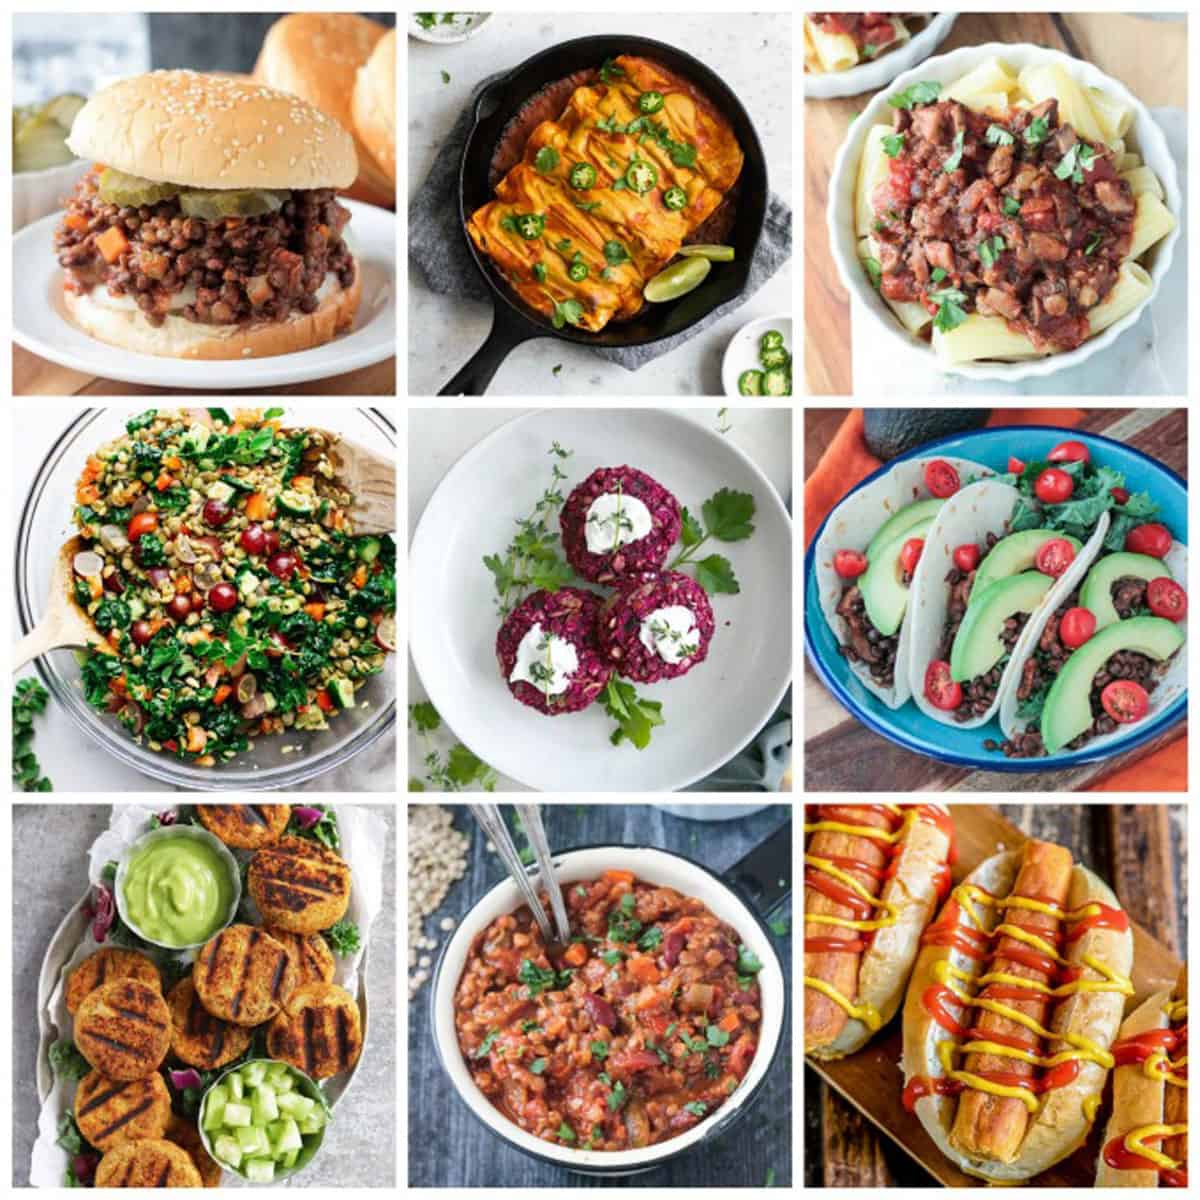 9-photo collage of a variety of vegan lentil recipes.